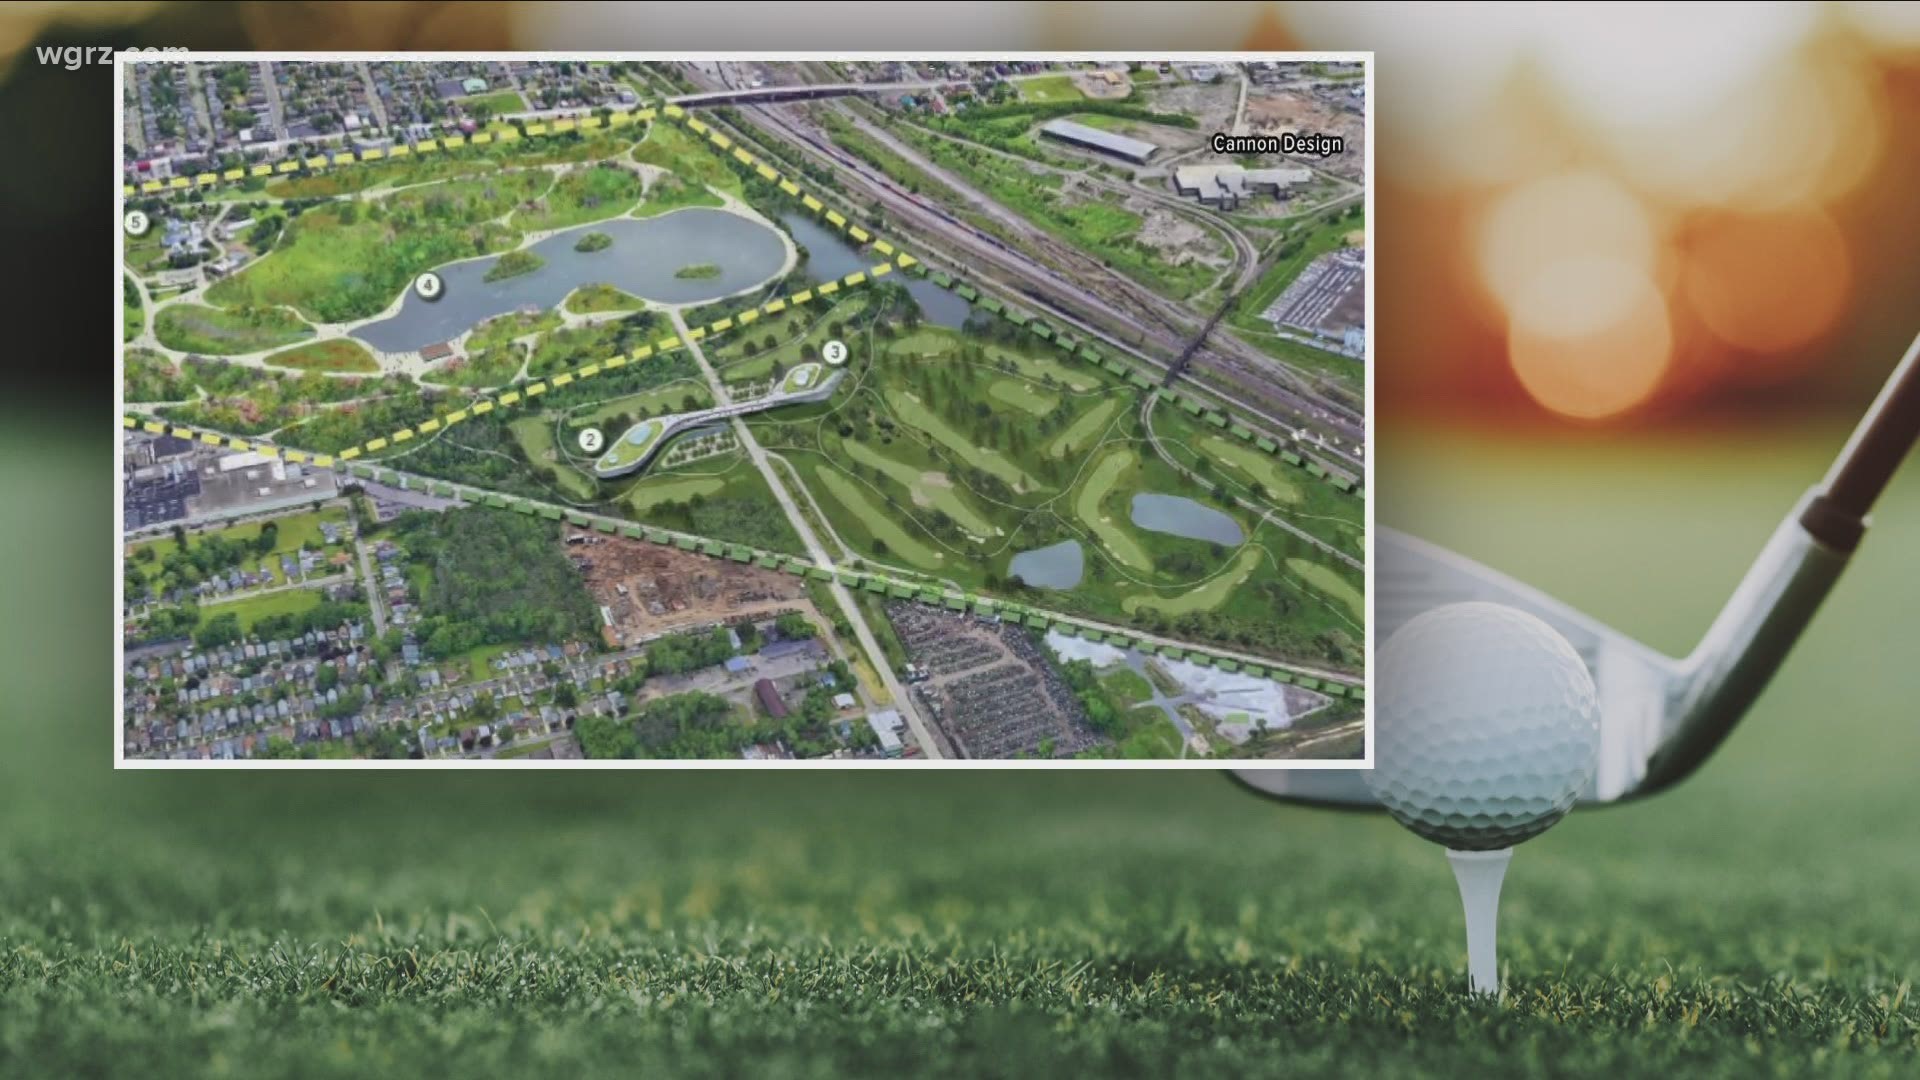 After years of challenges, phase one of a new Jack Nicklaus signature design public golf course is now underway in the city of Buffalo.